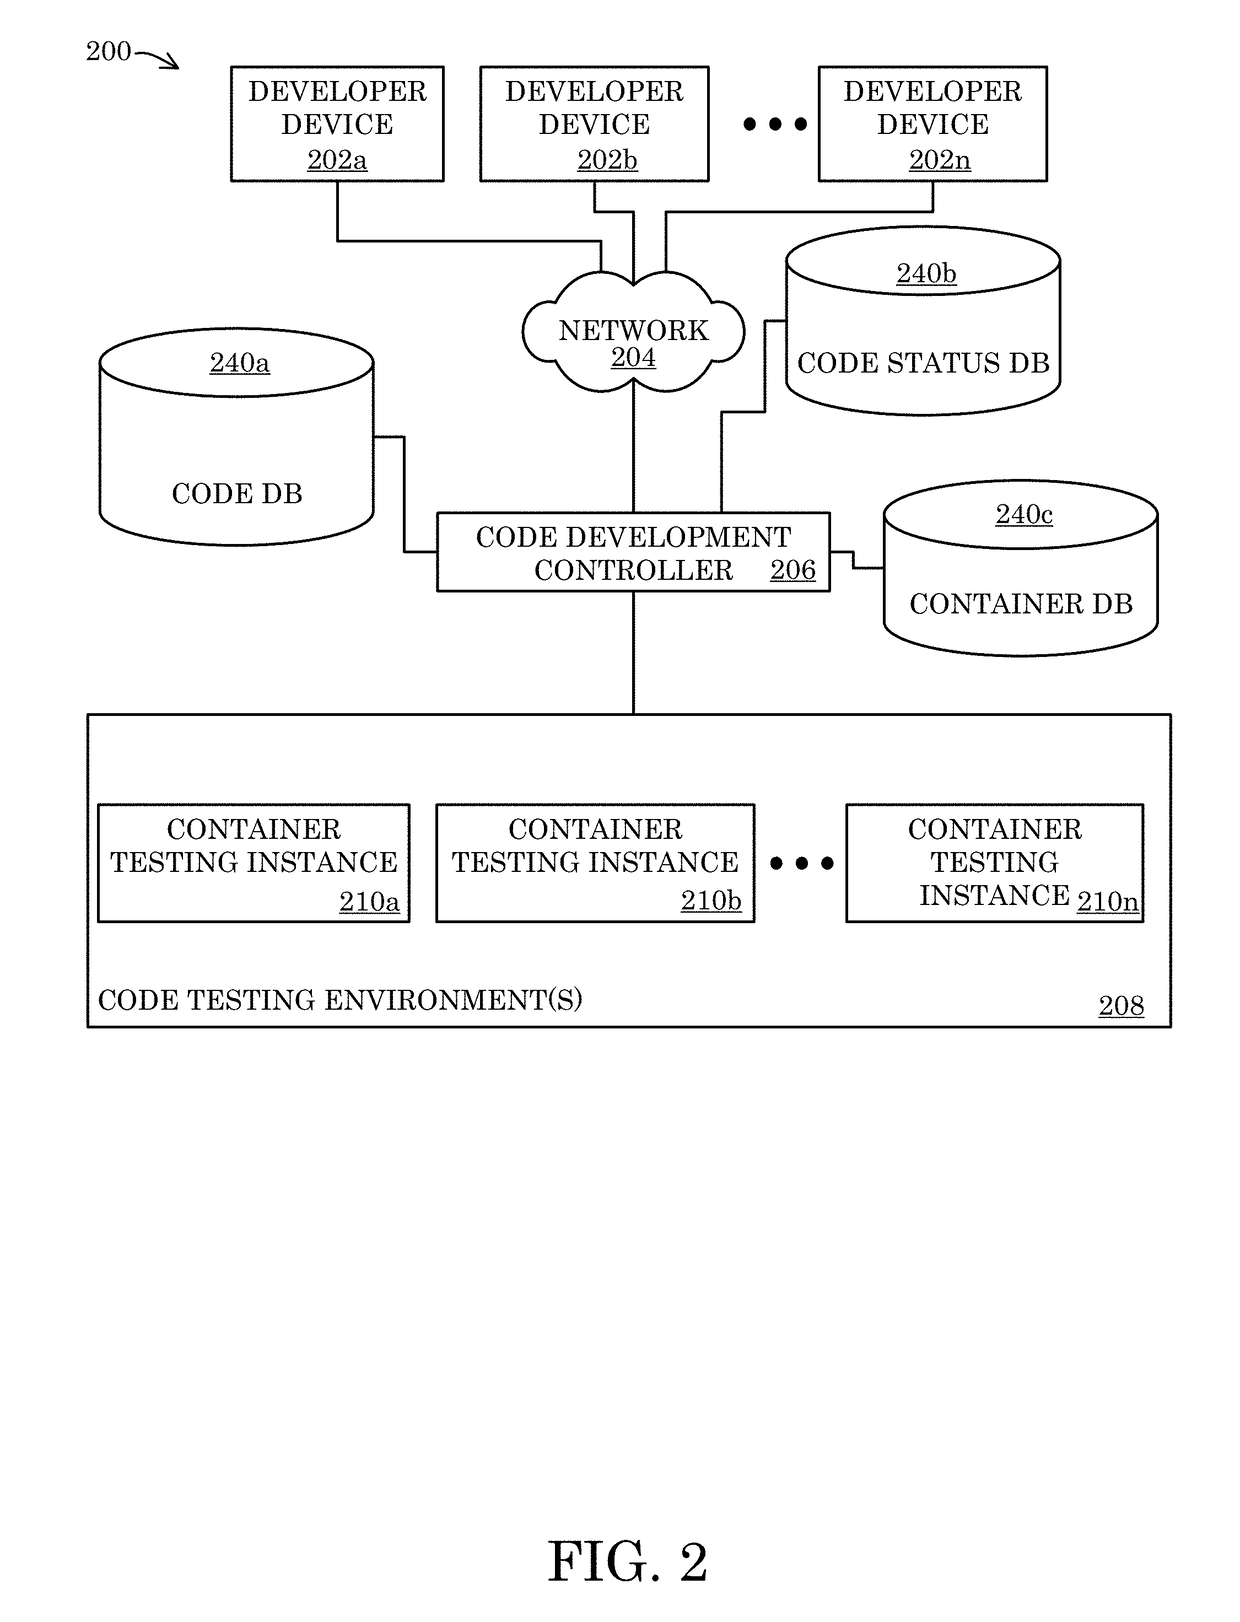 Systems, methods, and apparatus for automated code testing